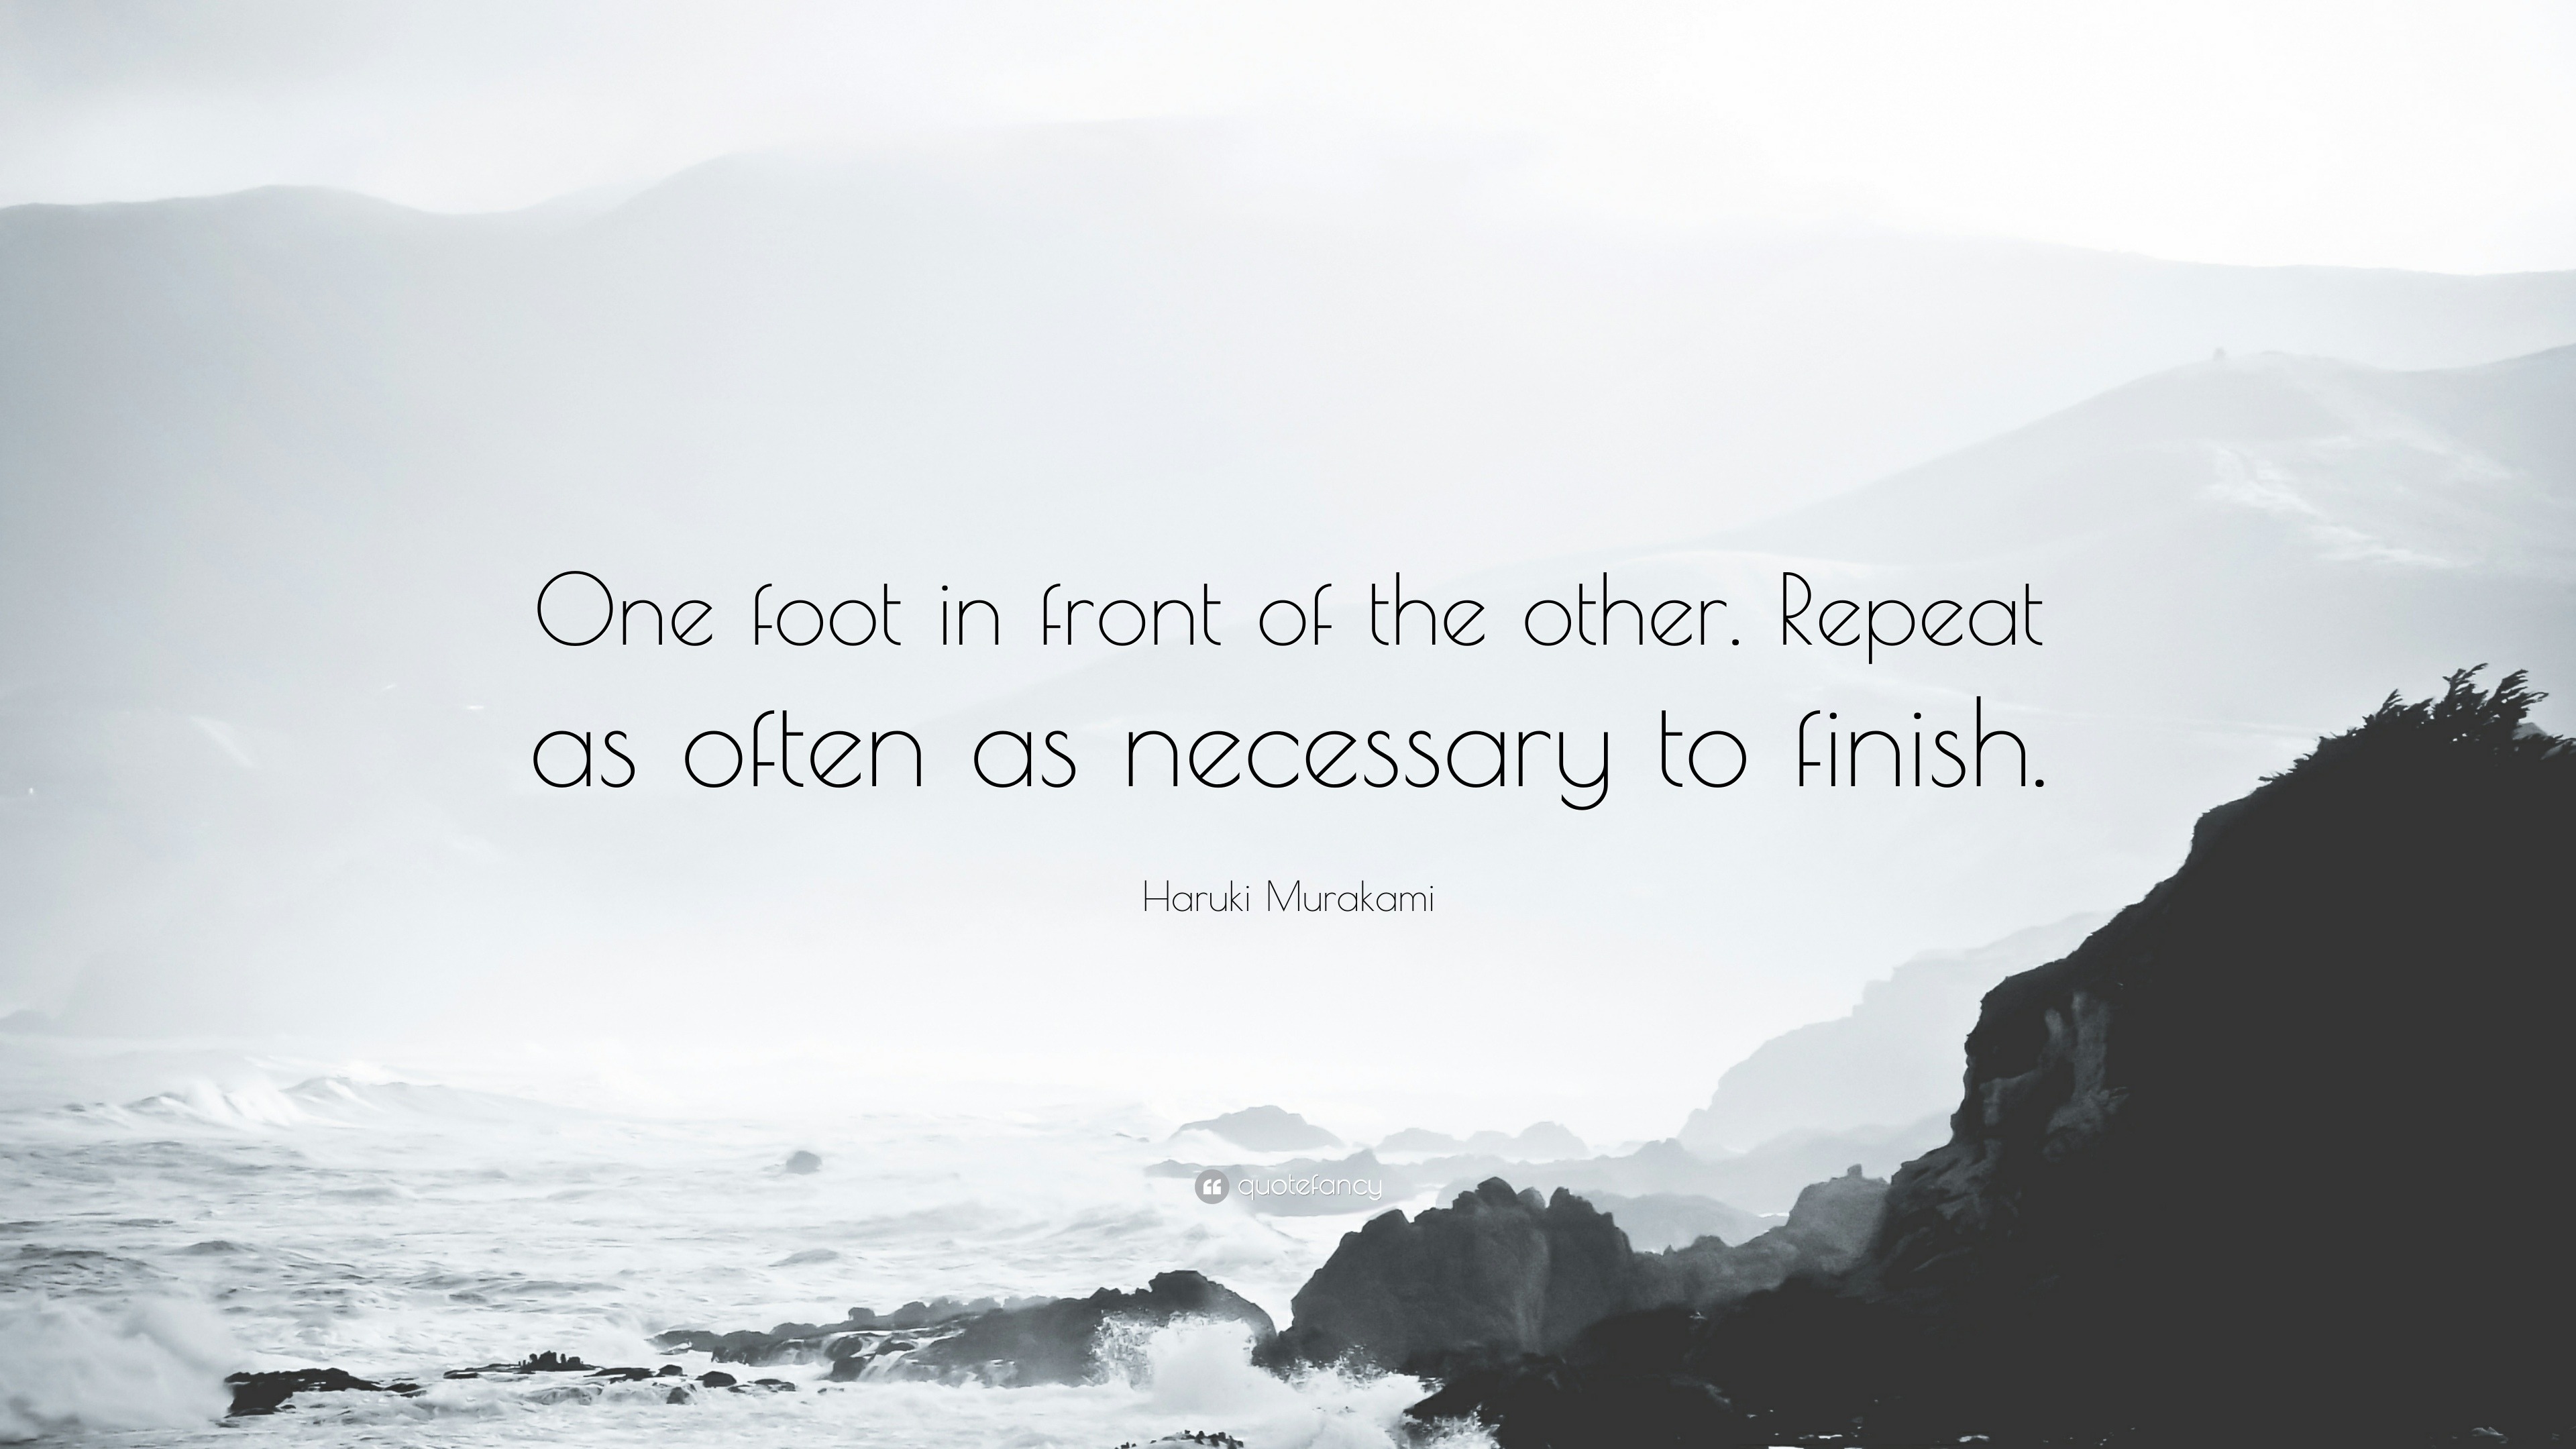 Haruki Murakami Quote: “One foot in front of the other. Repeat as often